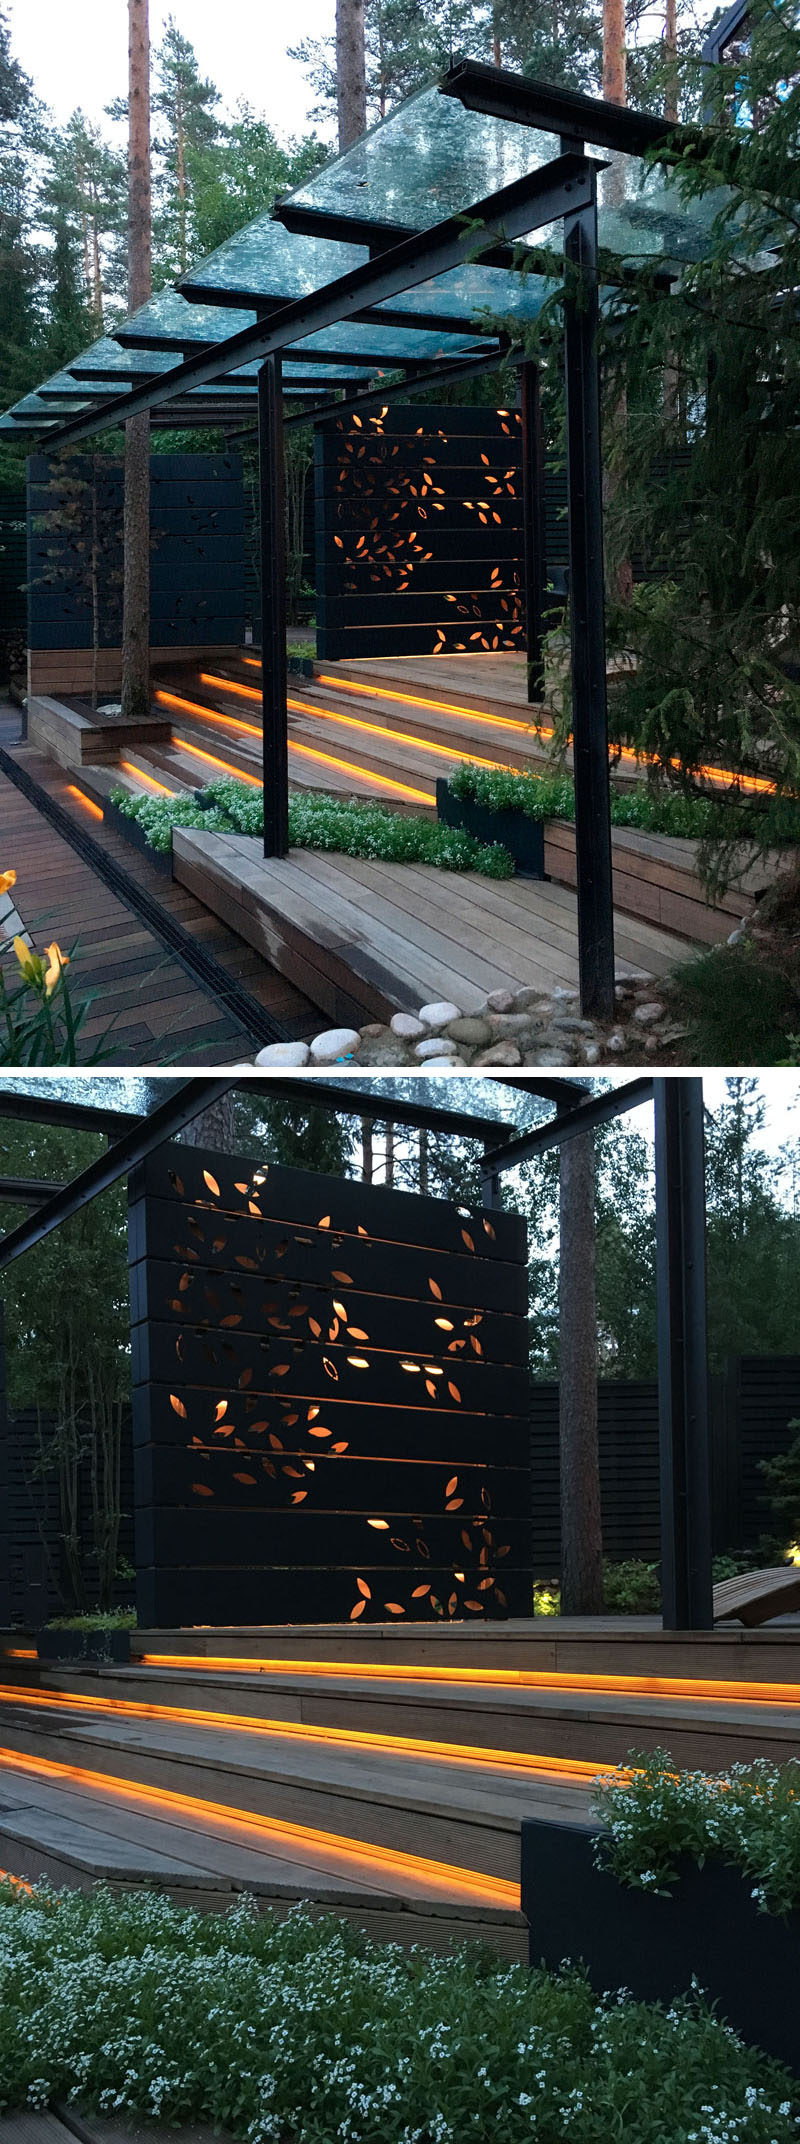 This gym has an landscaped outdoor area with hidden lighting under steps, built-in planters, and a decorative screen that has an artistic leaf pattern that lights up.